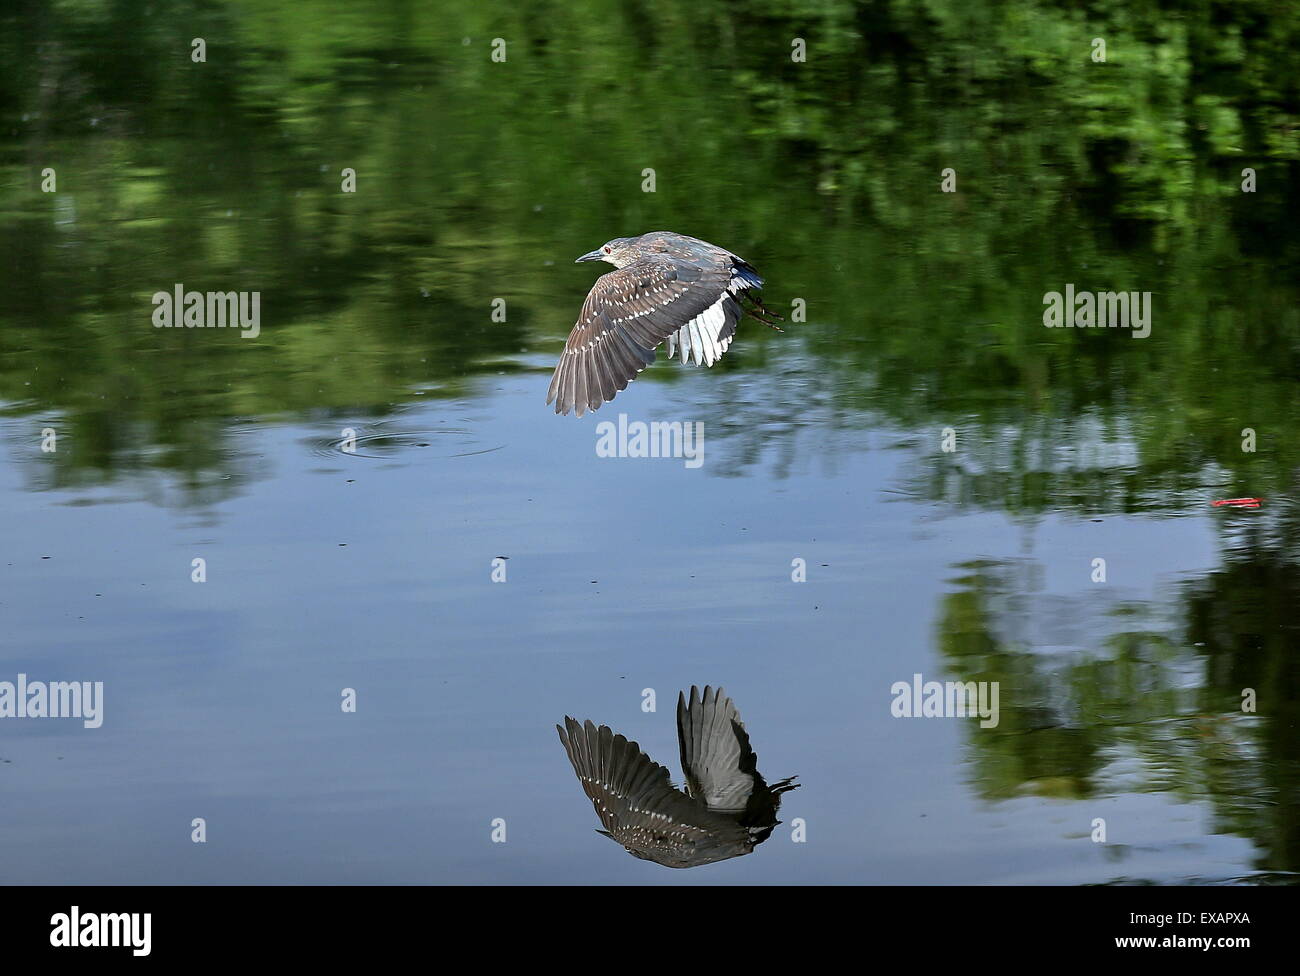 A Black-crowned night heron flys near a river in Natong, Jiangsu province, China on 17th May 2015. Stock Photo